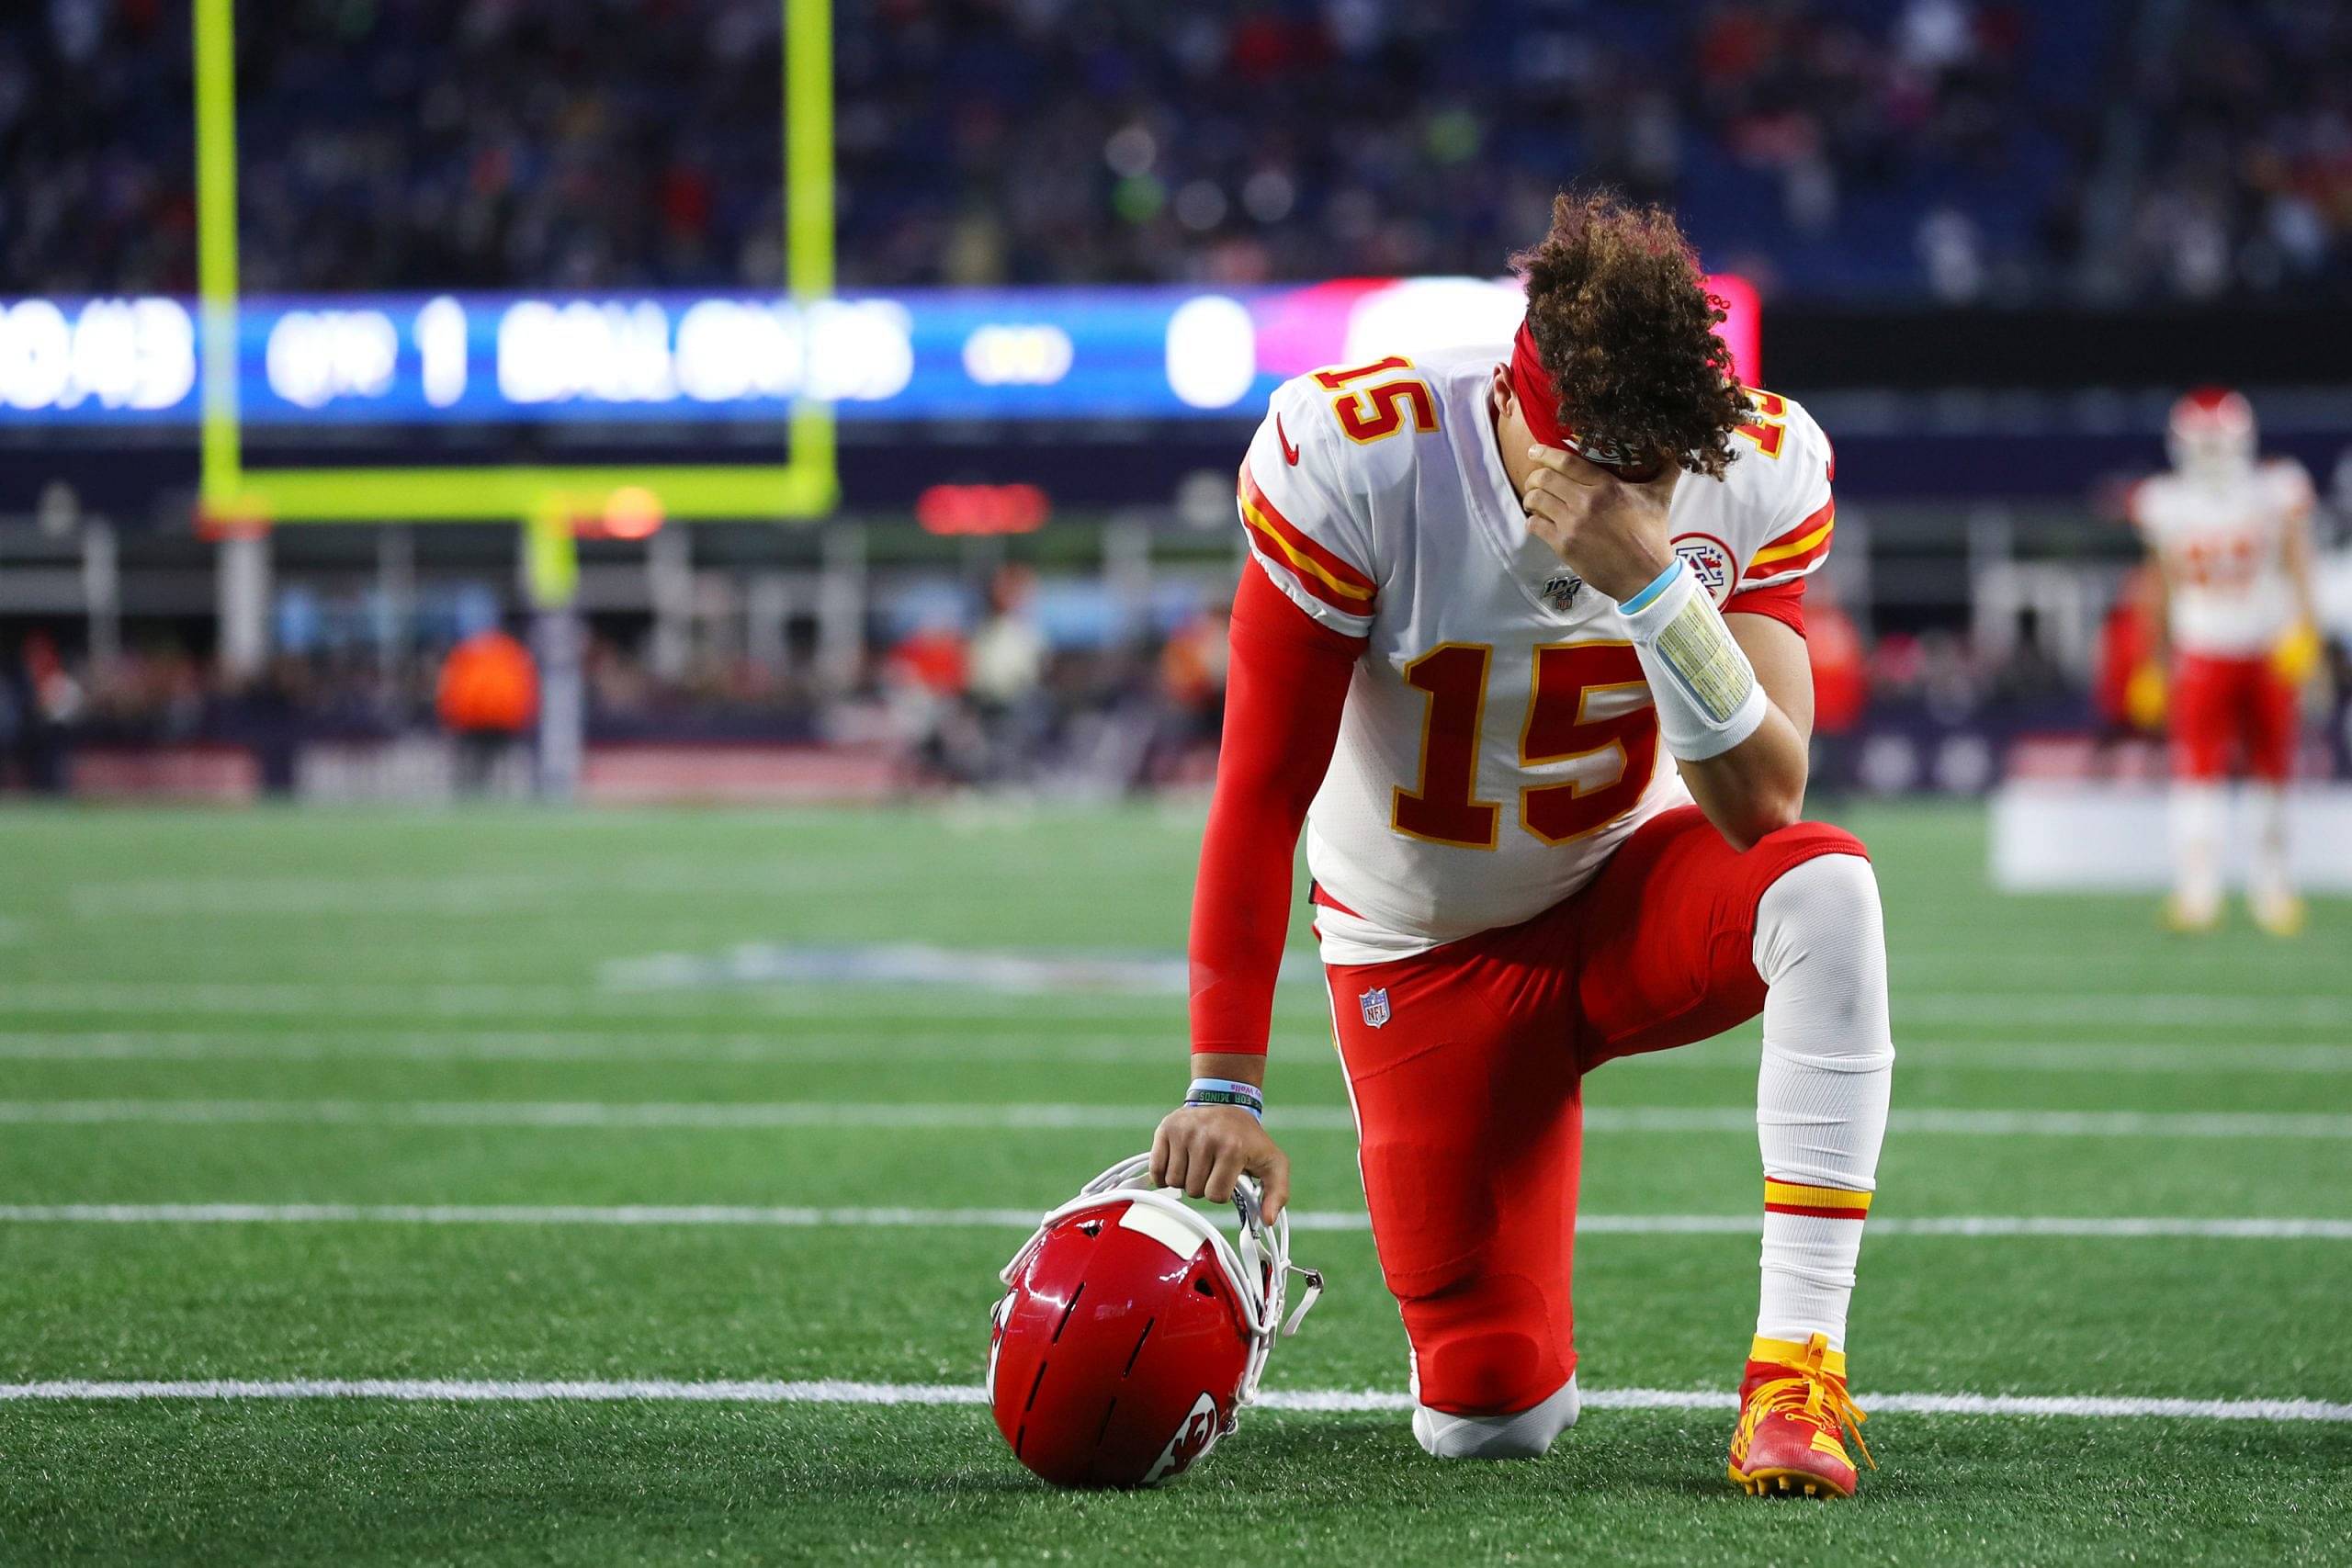 Patrick Mahomes, who signed a $16.4 million rookie deal, was robbed at gunpoint in insane robbery